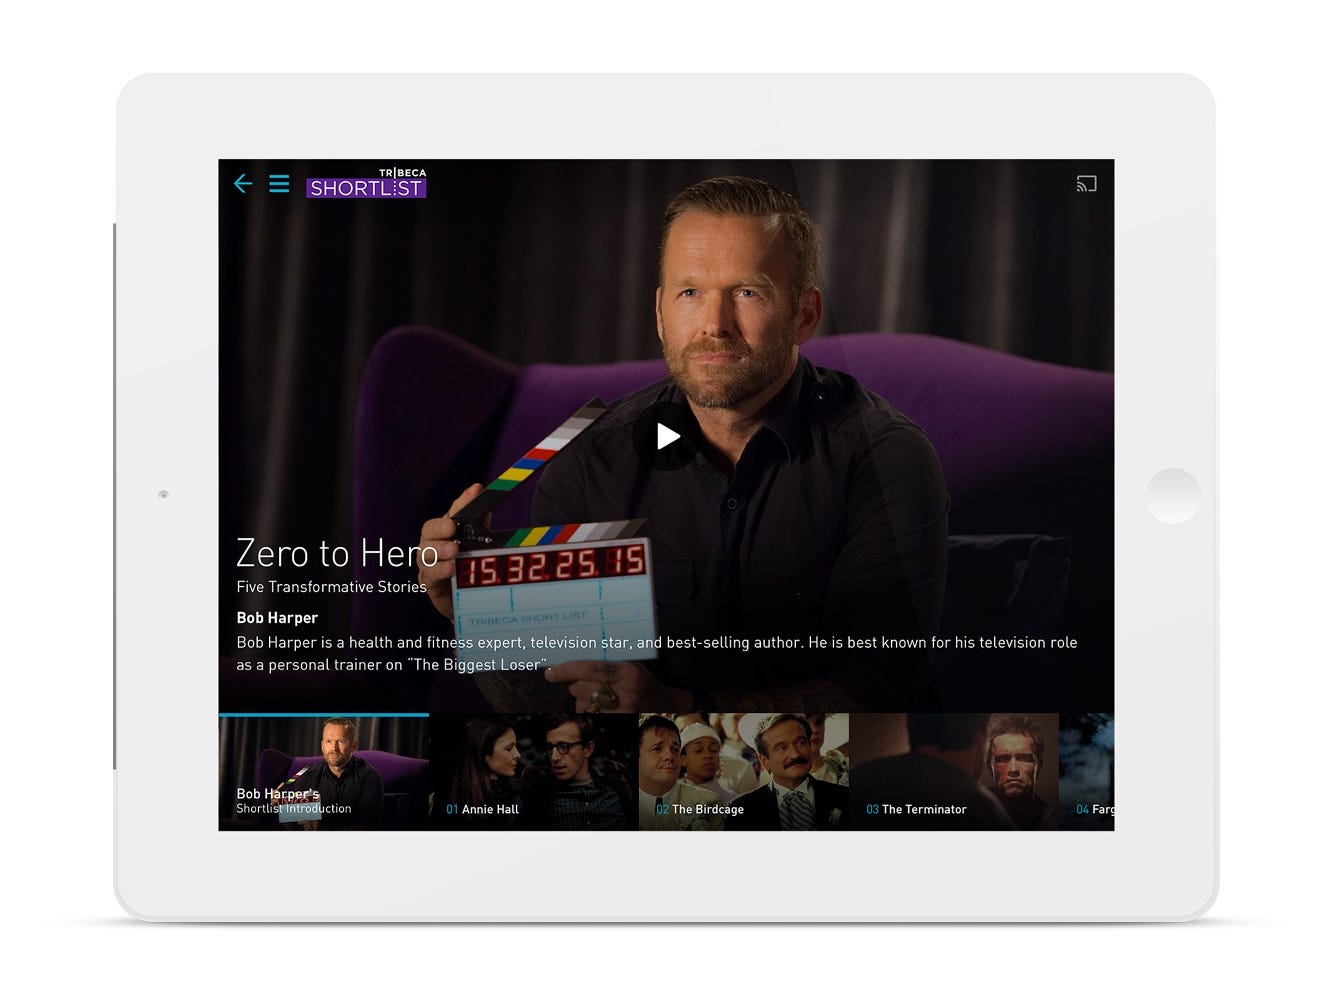 A screen shot of the new Tribeca Shortlist movie streaming service showing personal trainer Bob Harper (The Biggest Loser) with his list of recommended films.